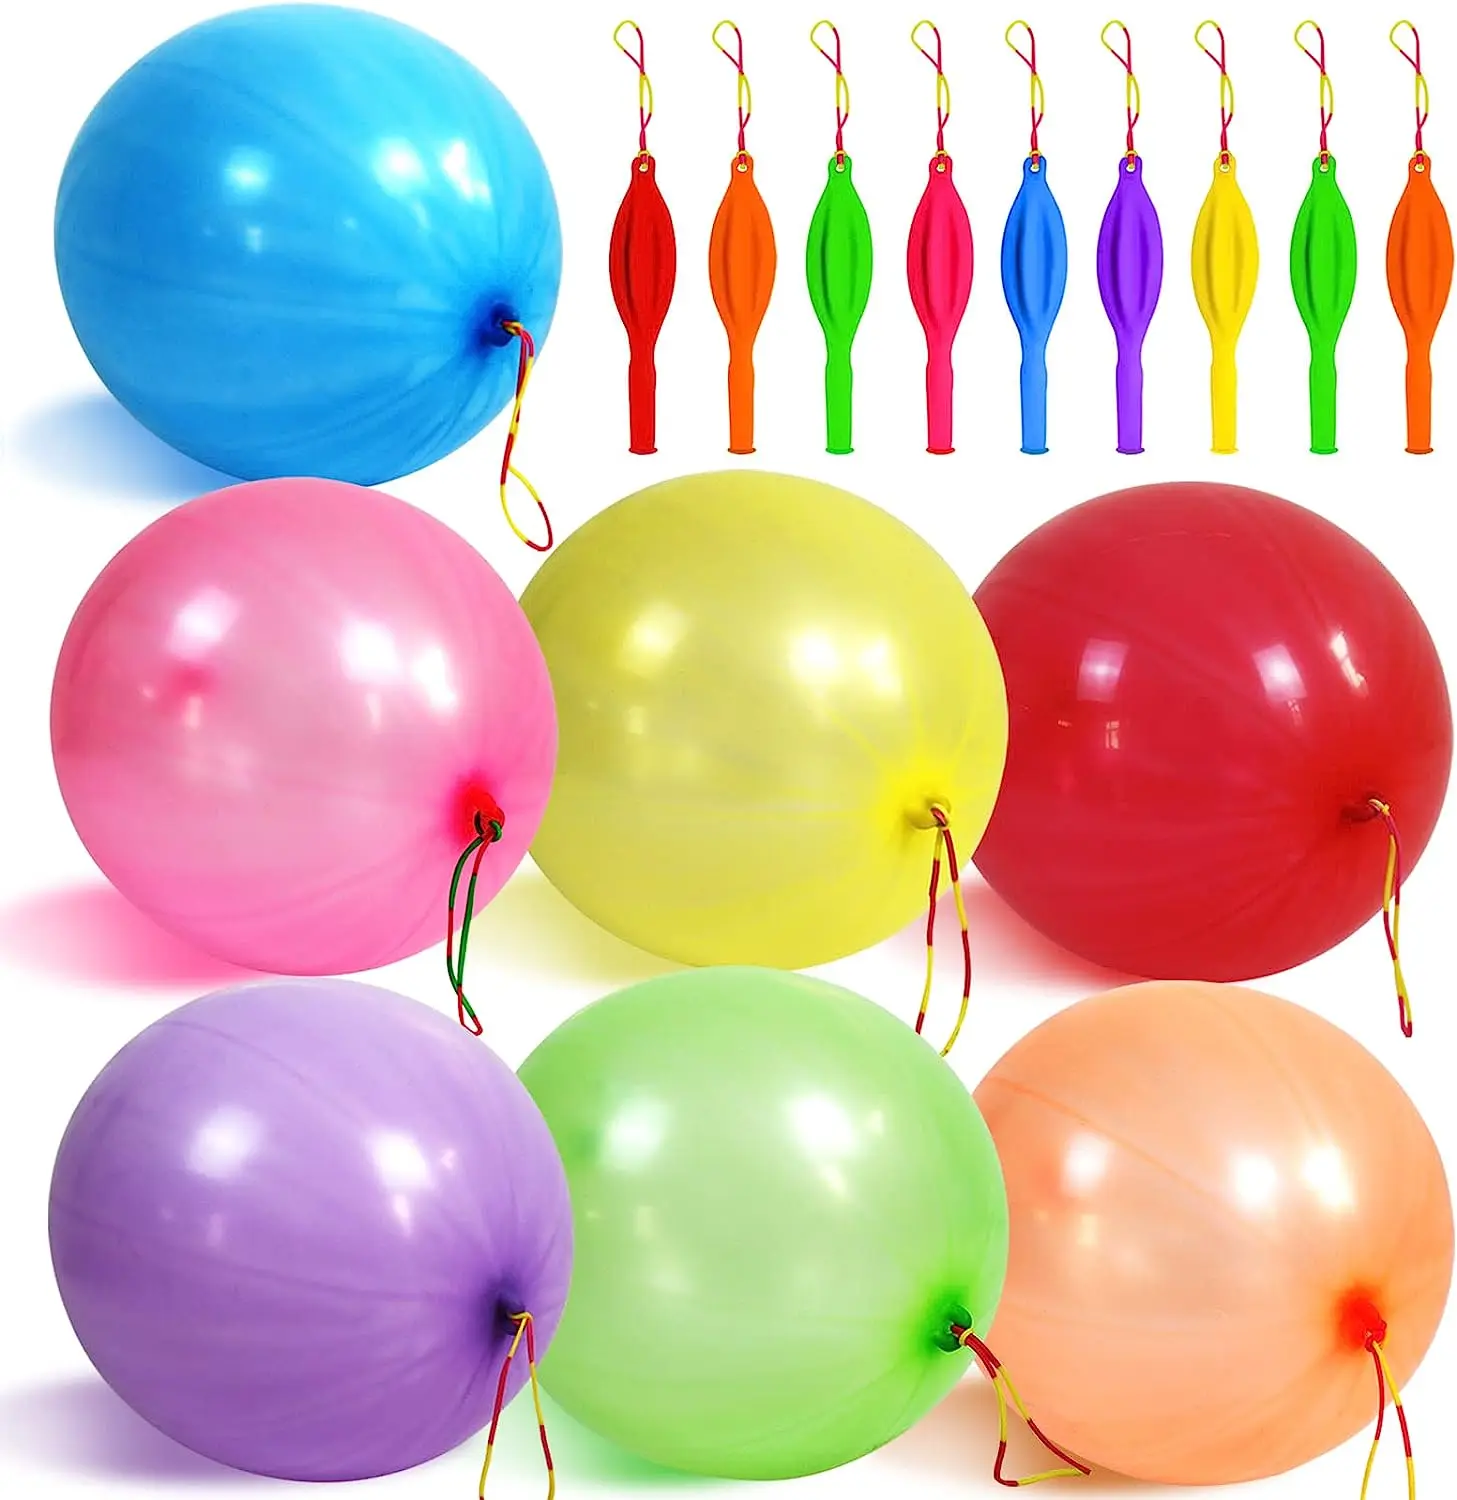 Punch Balloons Thickened Neon Punching Balloon Party Favors for Kids,Weddings,Classroom prize Supply Punch Balloons